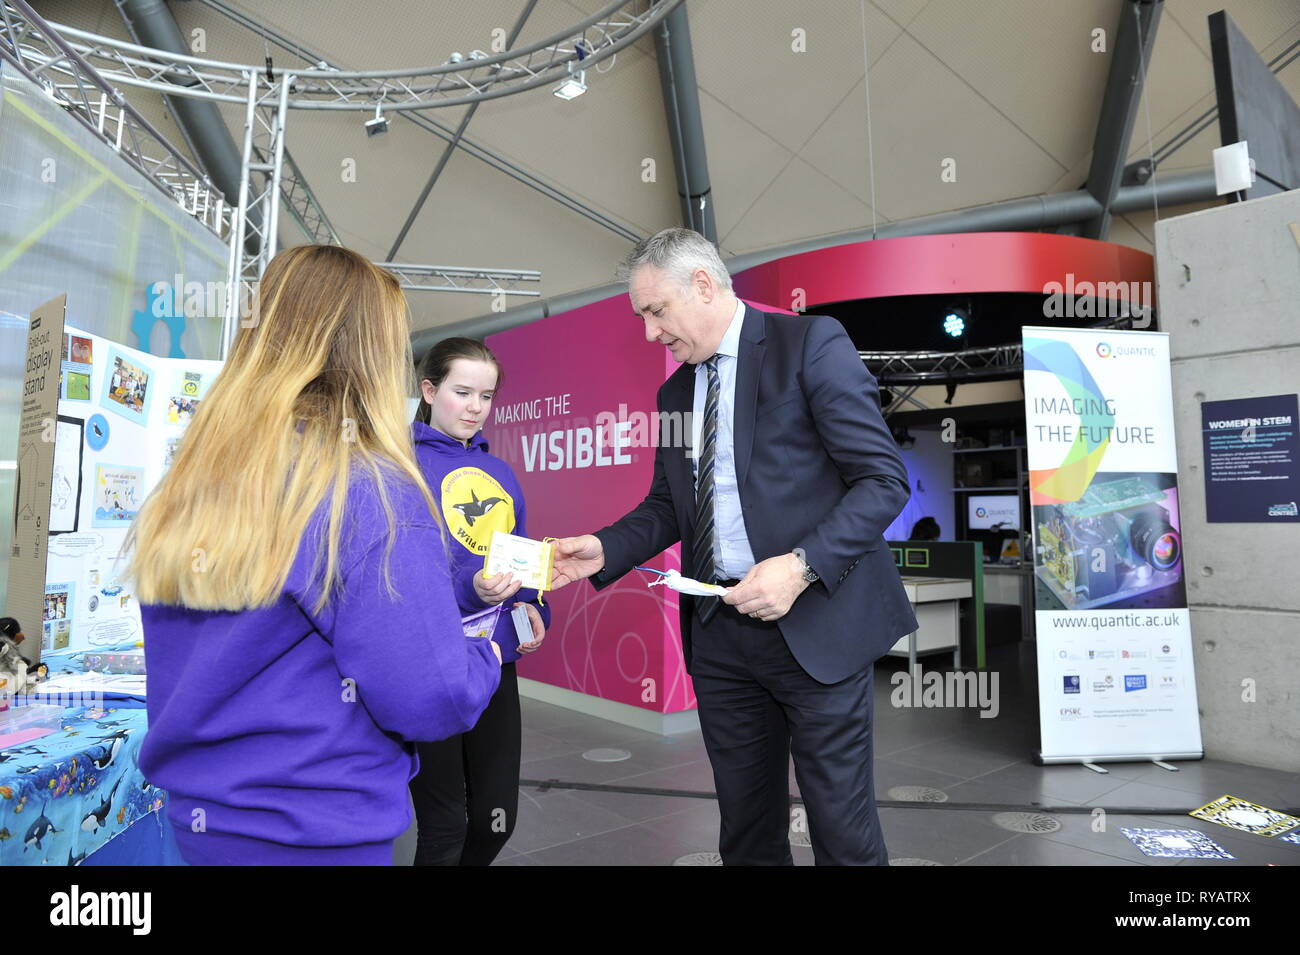 Glasgow, UK. 13 March 2019.  Mr Lochhead will meets P5 and P6 pupils from Sunnyside Primary School showcasing an environmental campaign they have created, as well as viewing exhibits from companies from across the Science, Technology, Engineering and Mathematics (STEM) industry.  Funding for Scotland’s four science centres will be announced during British Science Week.  Scotland is the only part of the UK where science centres are supported through annual funding. Minister for Science Richard Lochhead will unveils more funding. Stock Photo